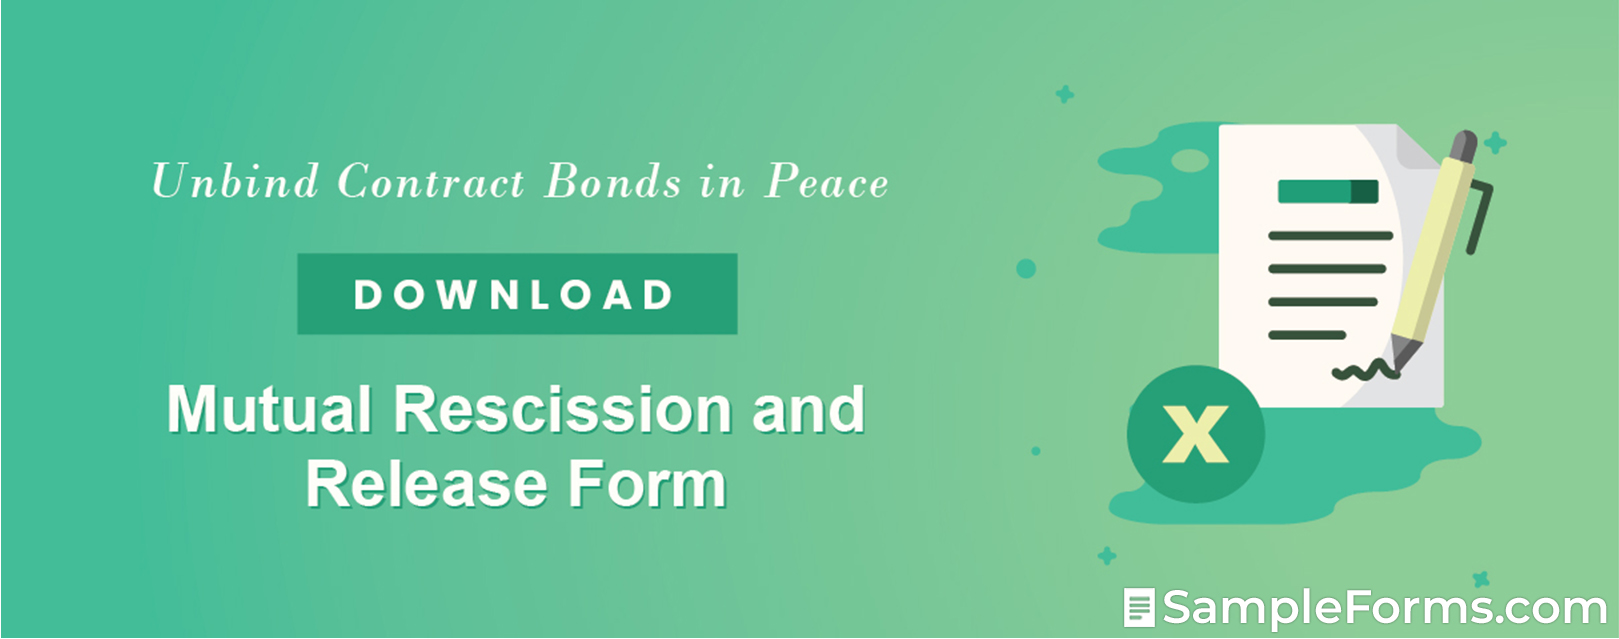 Mutual Rescission and Release Form